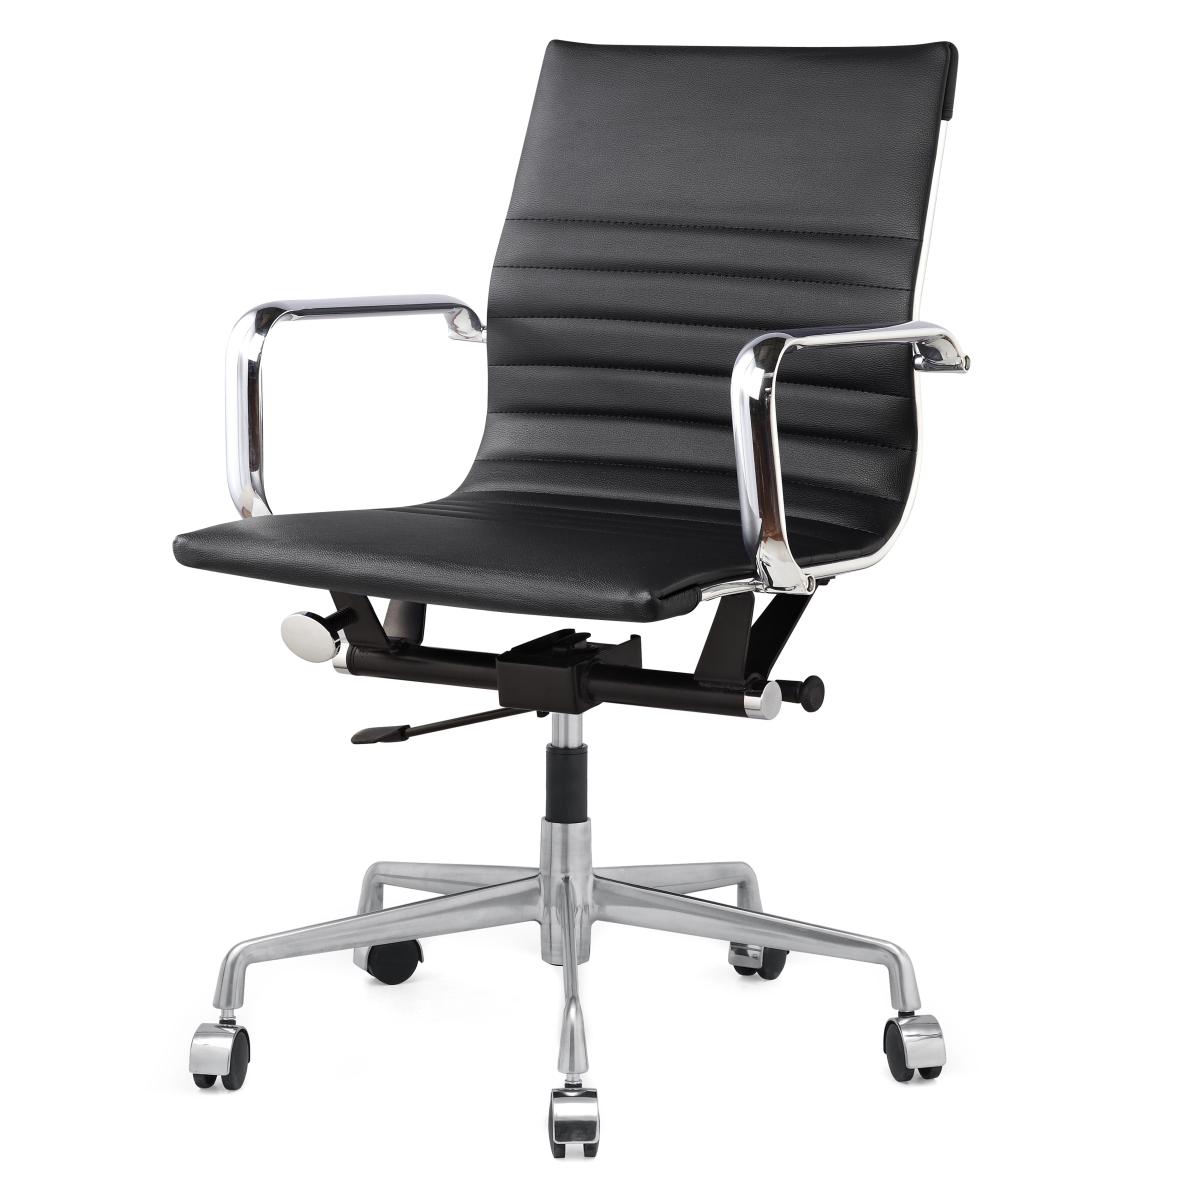 348-blk M348 Office Chair In Vegan Leather - Chrome & Black